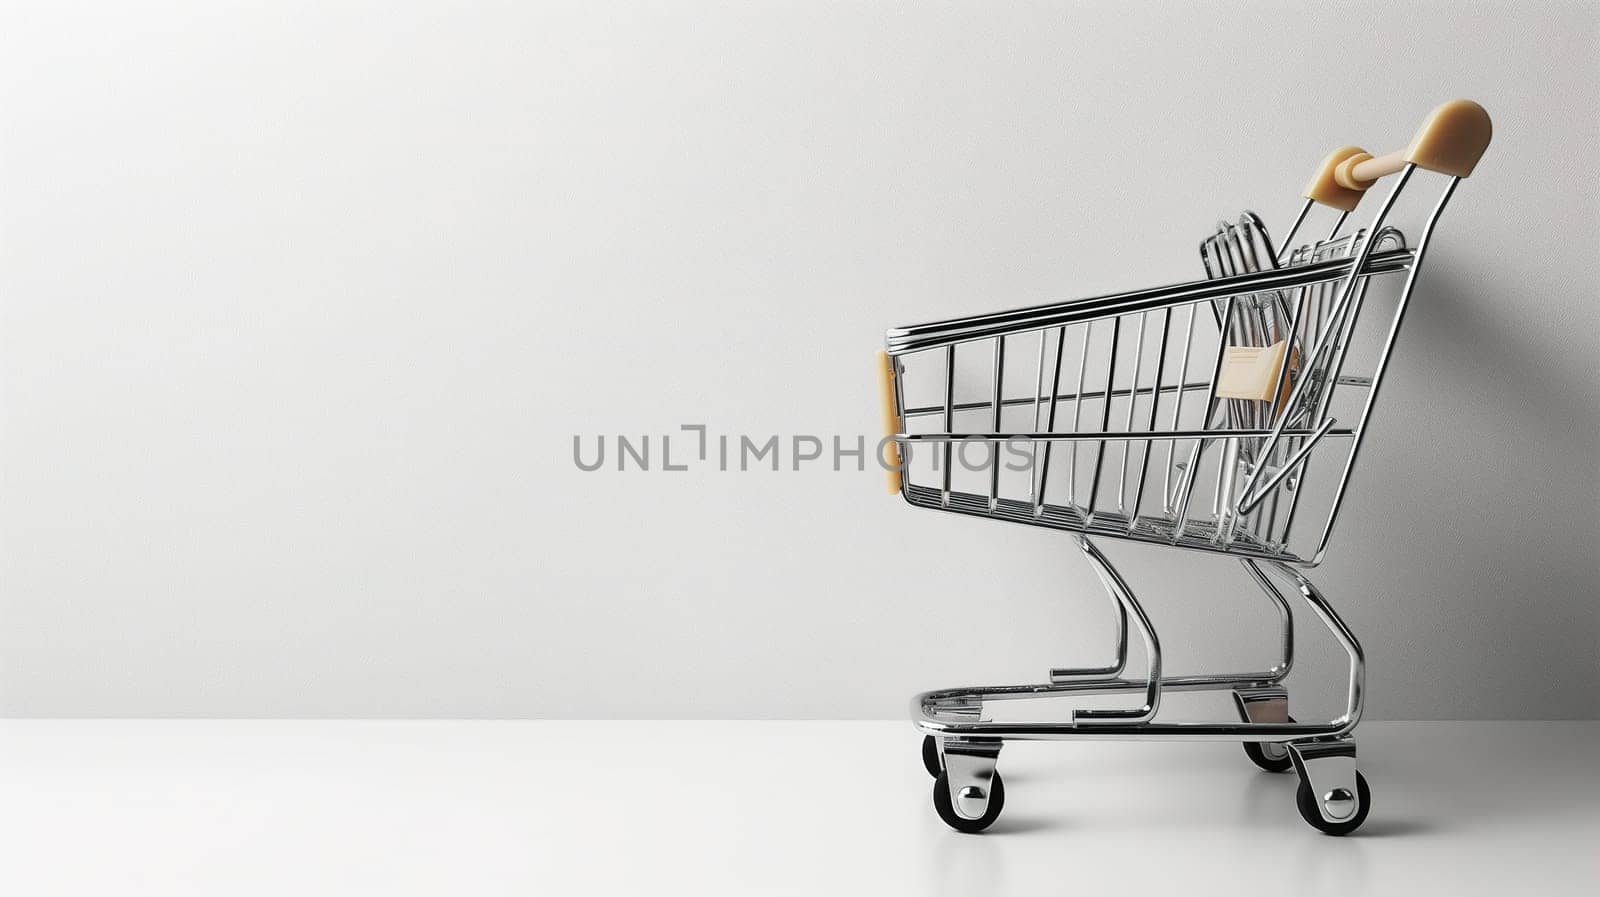 A silver shopping cart with a sturdy wooden handle stands ready for use, symbolizing the sale and Black Friday concepts. The cart is designed for carrying goods in a store or supermarket.